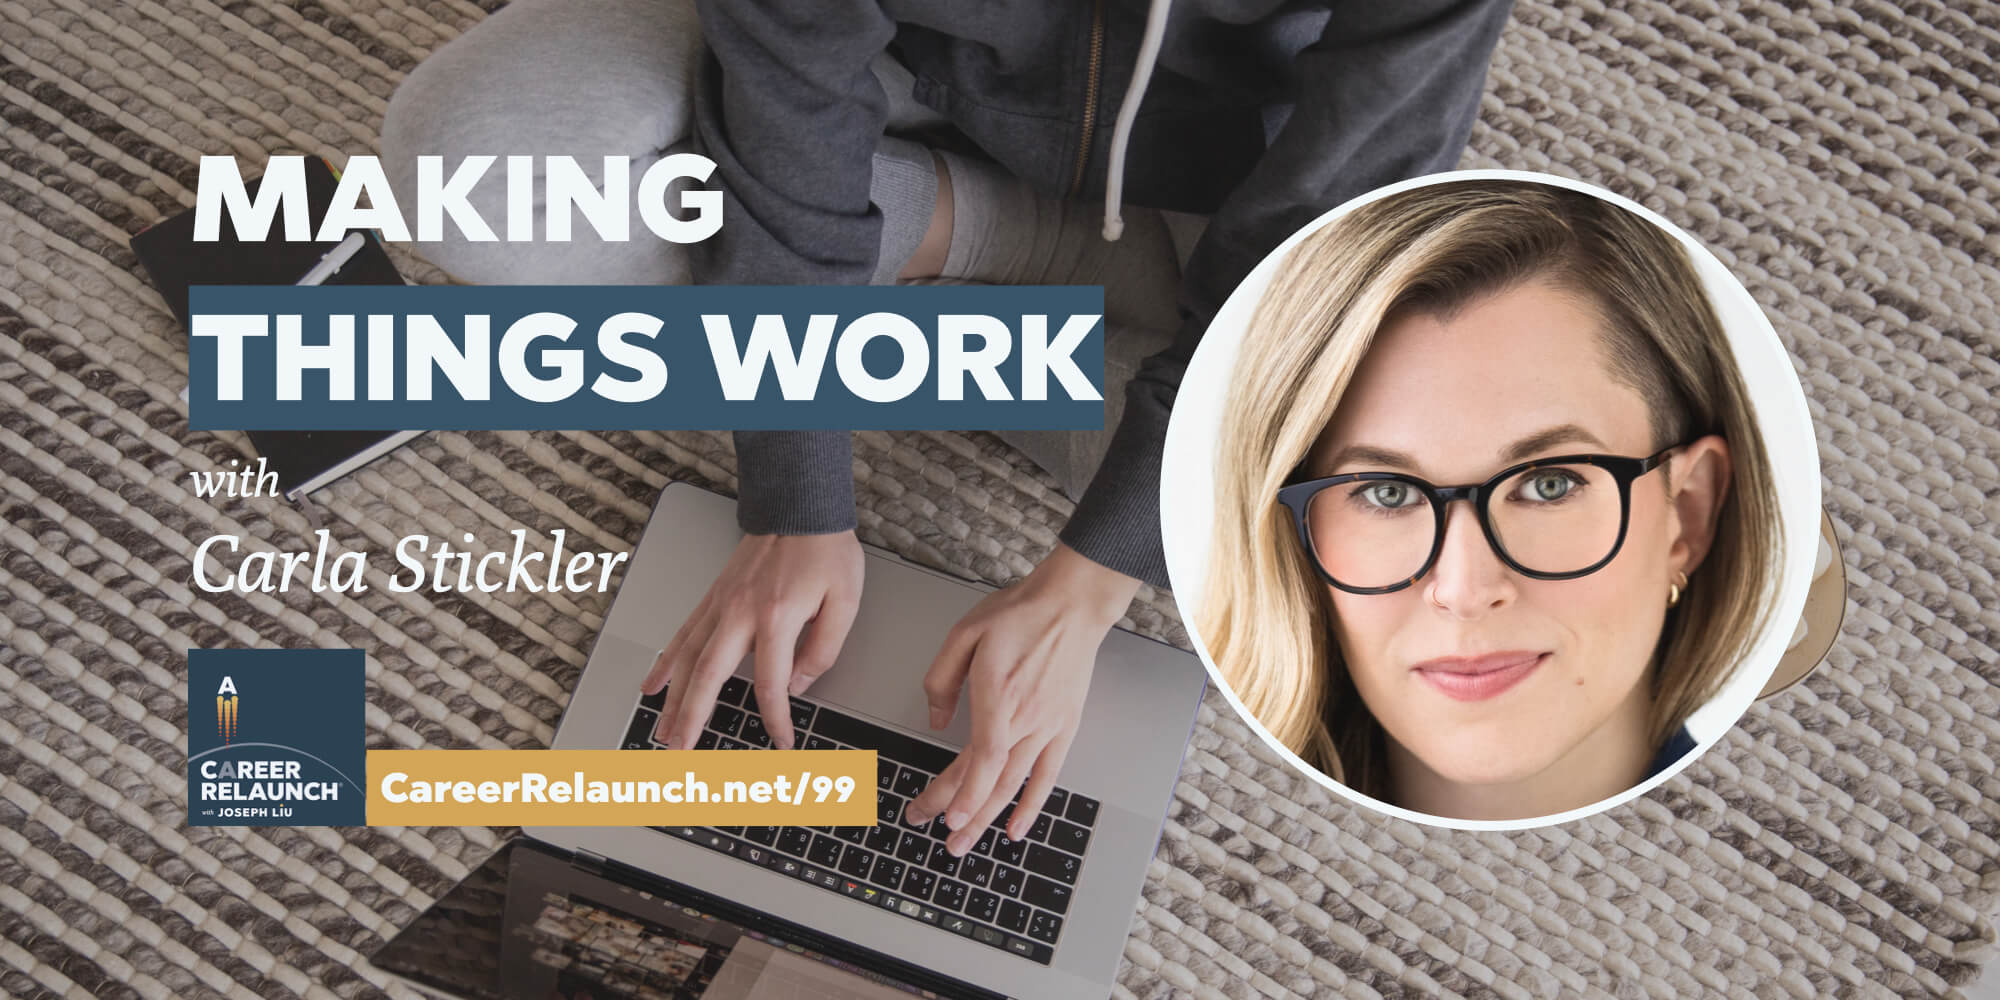 Making Things Work with Carla Stickler- Career Relaunch® podcast episode 99